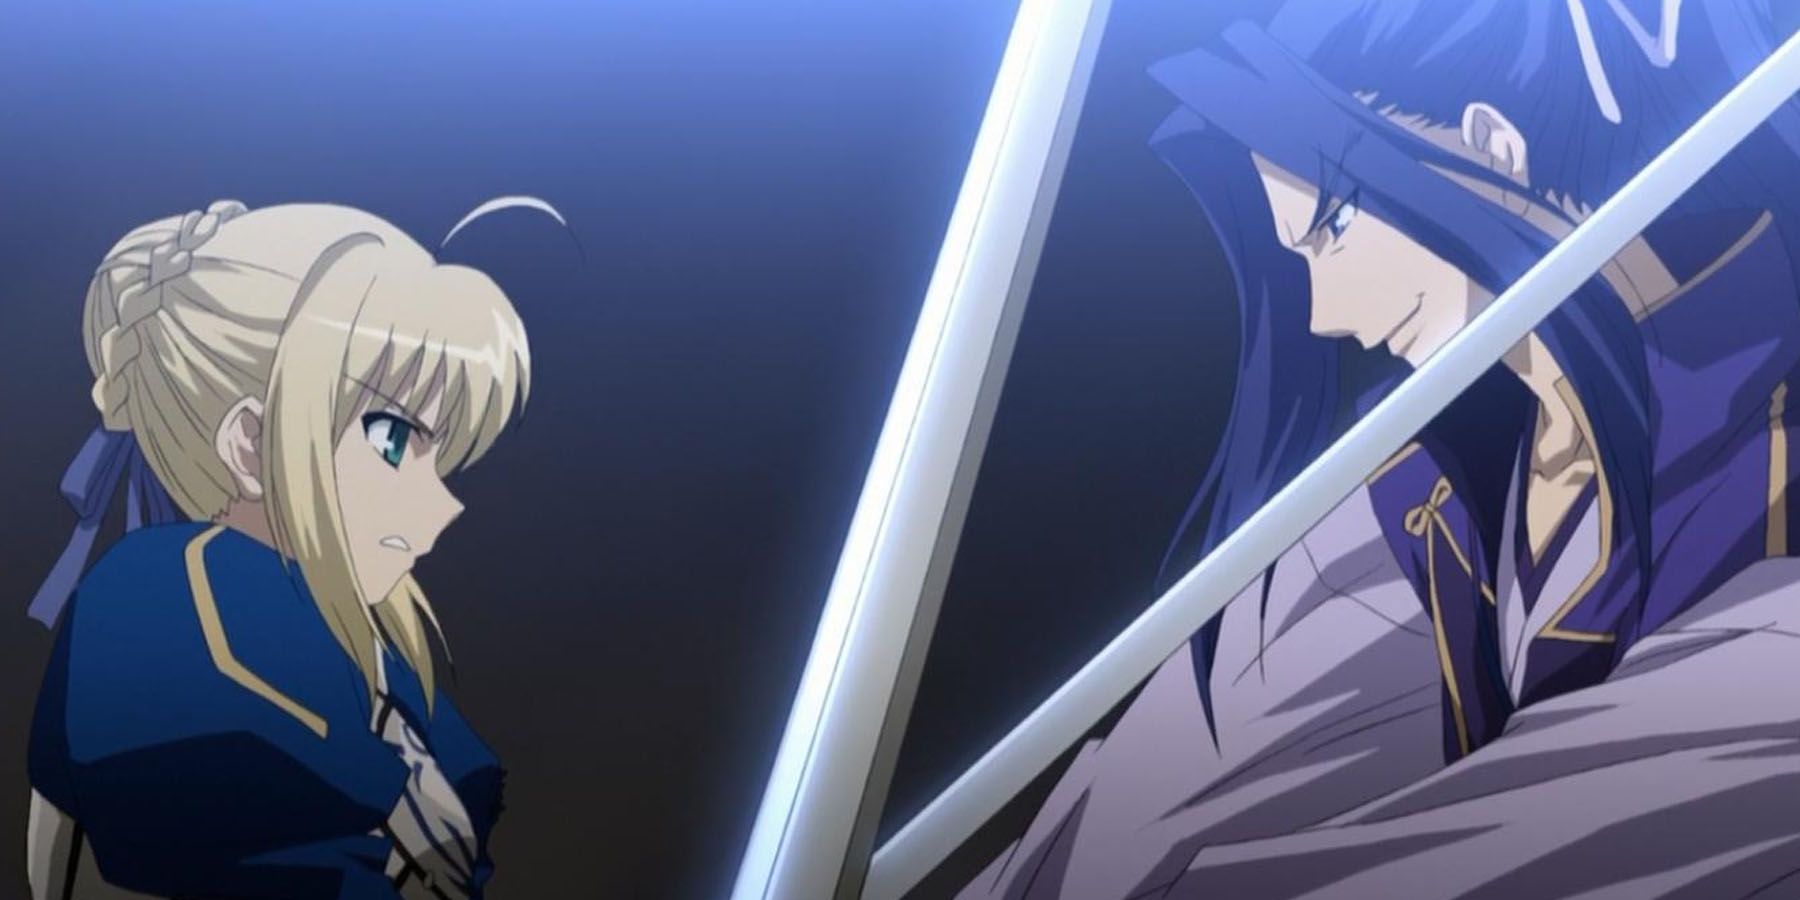 Saber fighting Assassin in Fate Stay Night